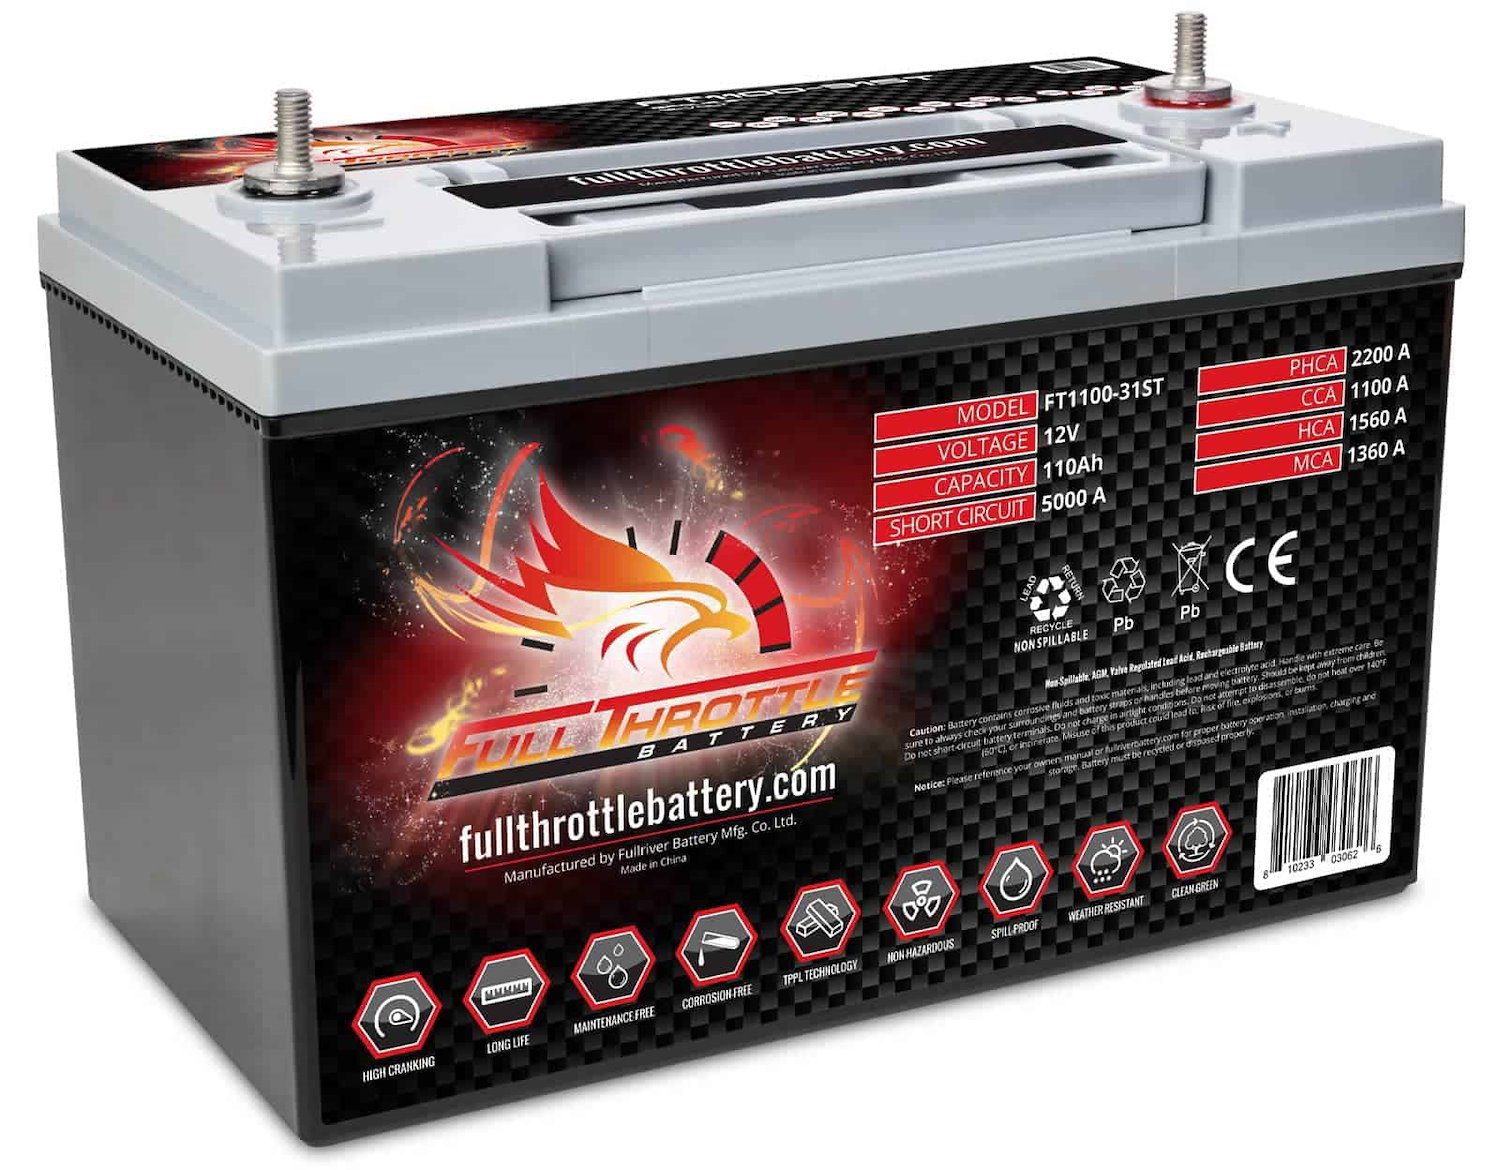 FT1100-31ST FT-Series AGM 12 V Battery, Group: 31, 1100 CCA, 110 AH, 3/8" Stud Terminal RHP